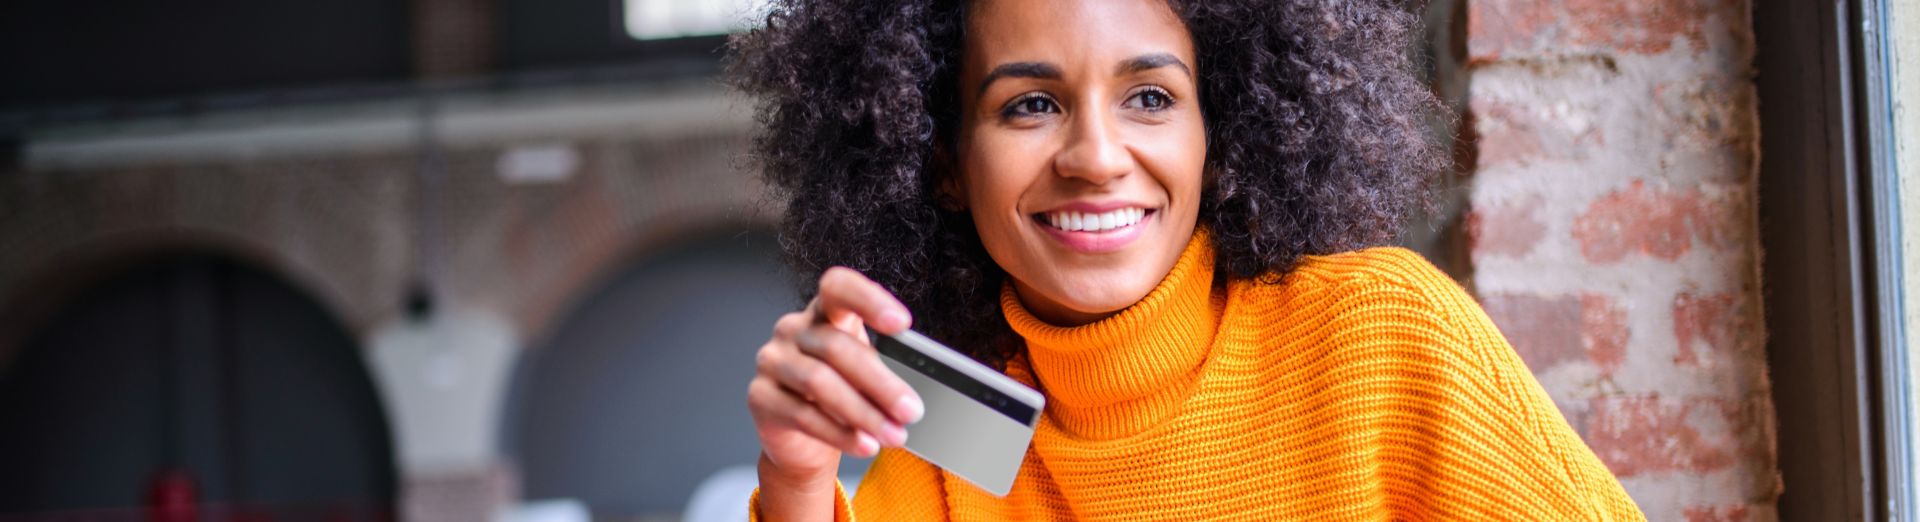 Smiling woman holds up a tablet and a credit card to make a purchase.